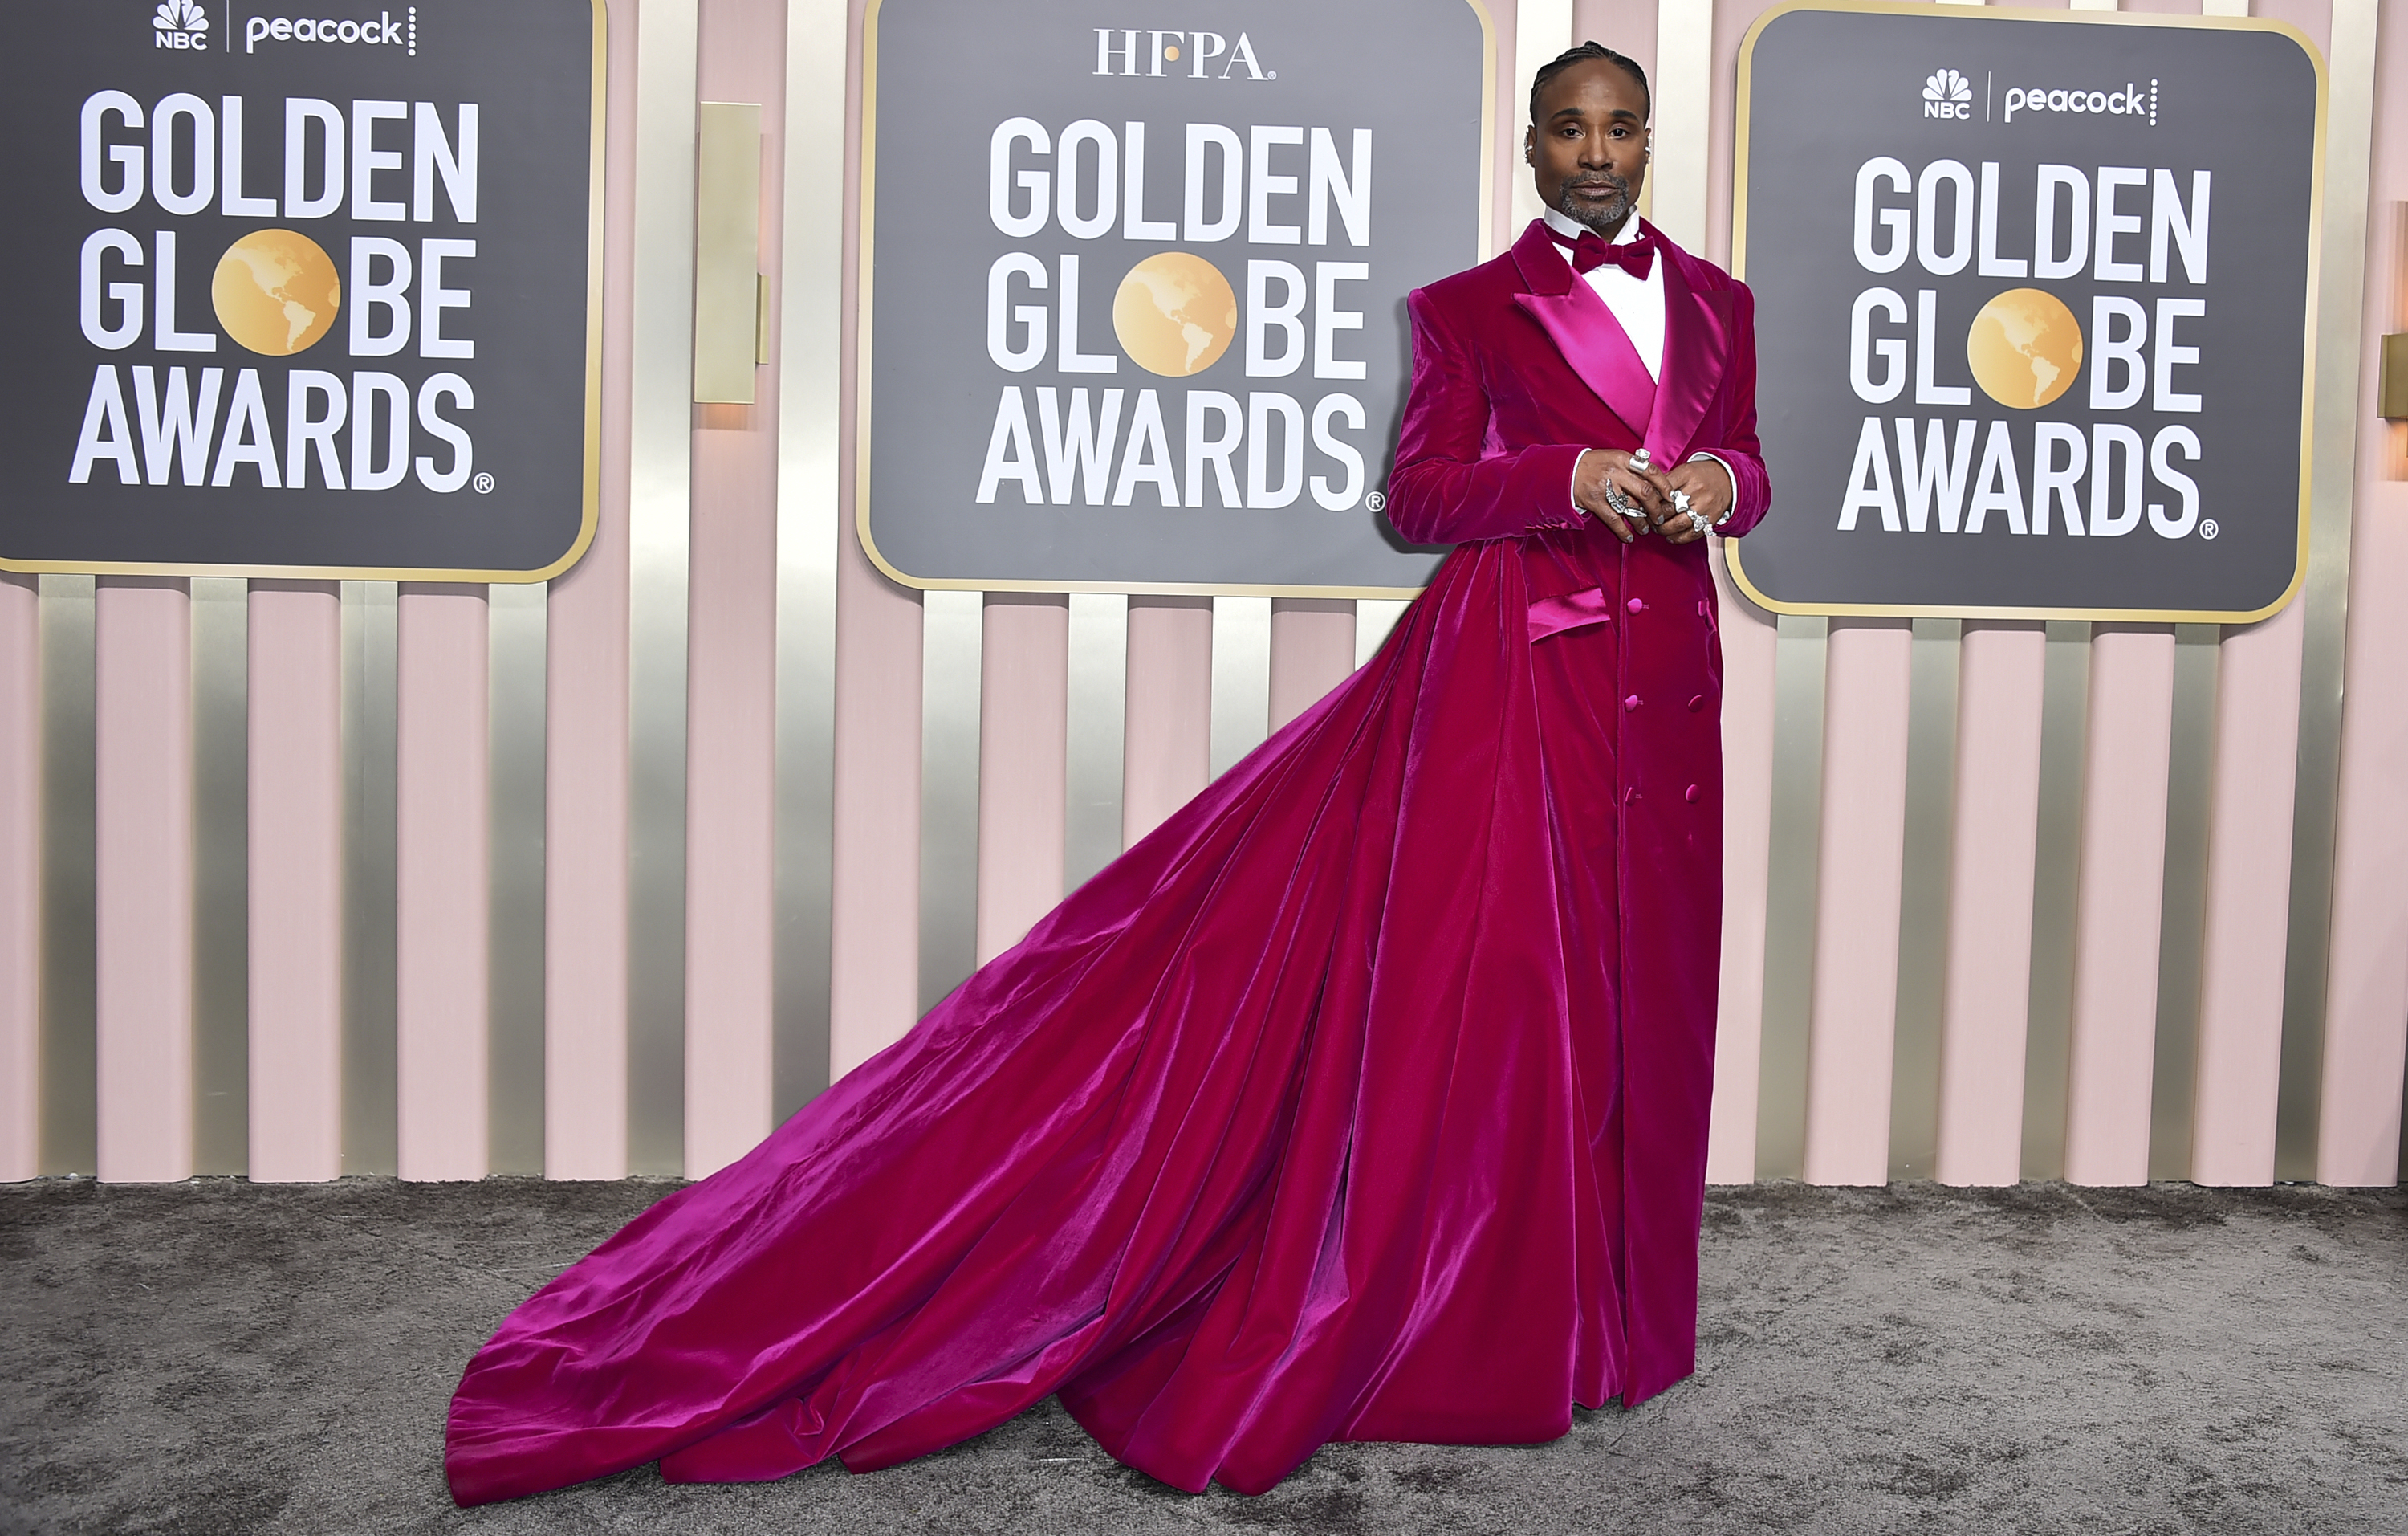 Billy Porter wearing a bright pink tuxedo gown with a long train